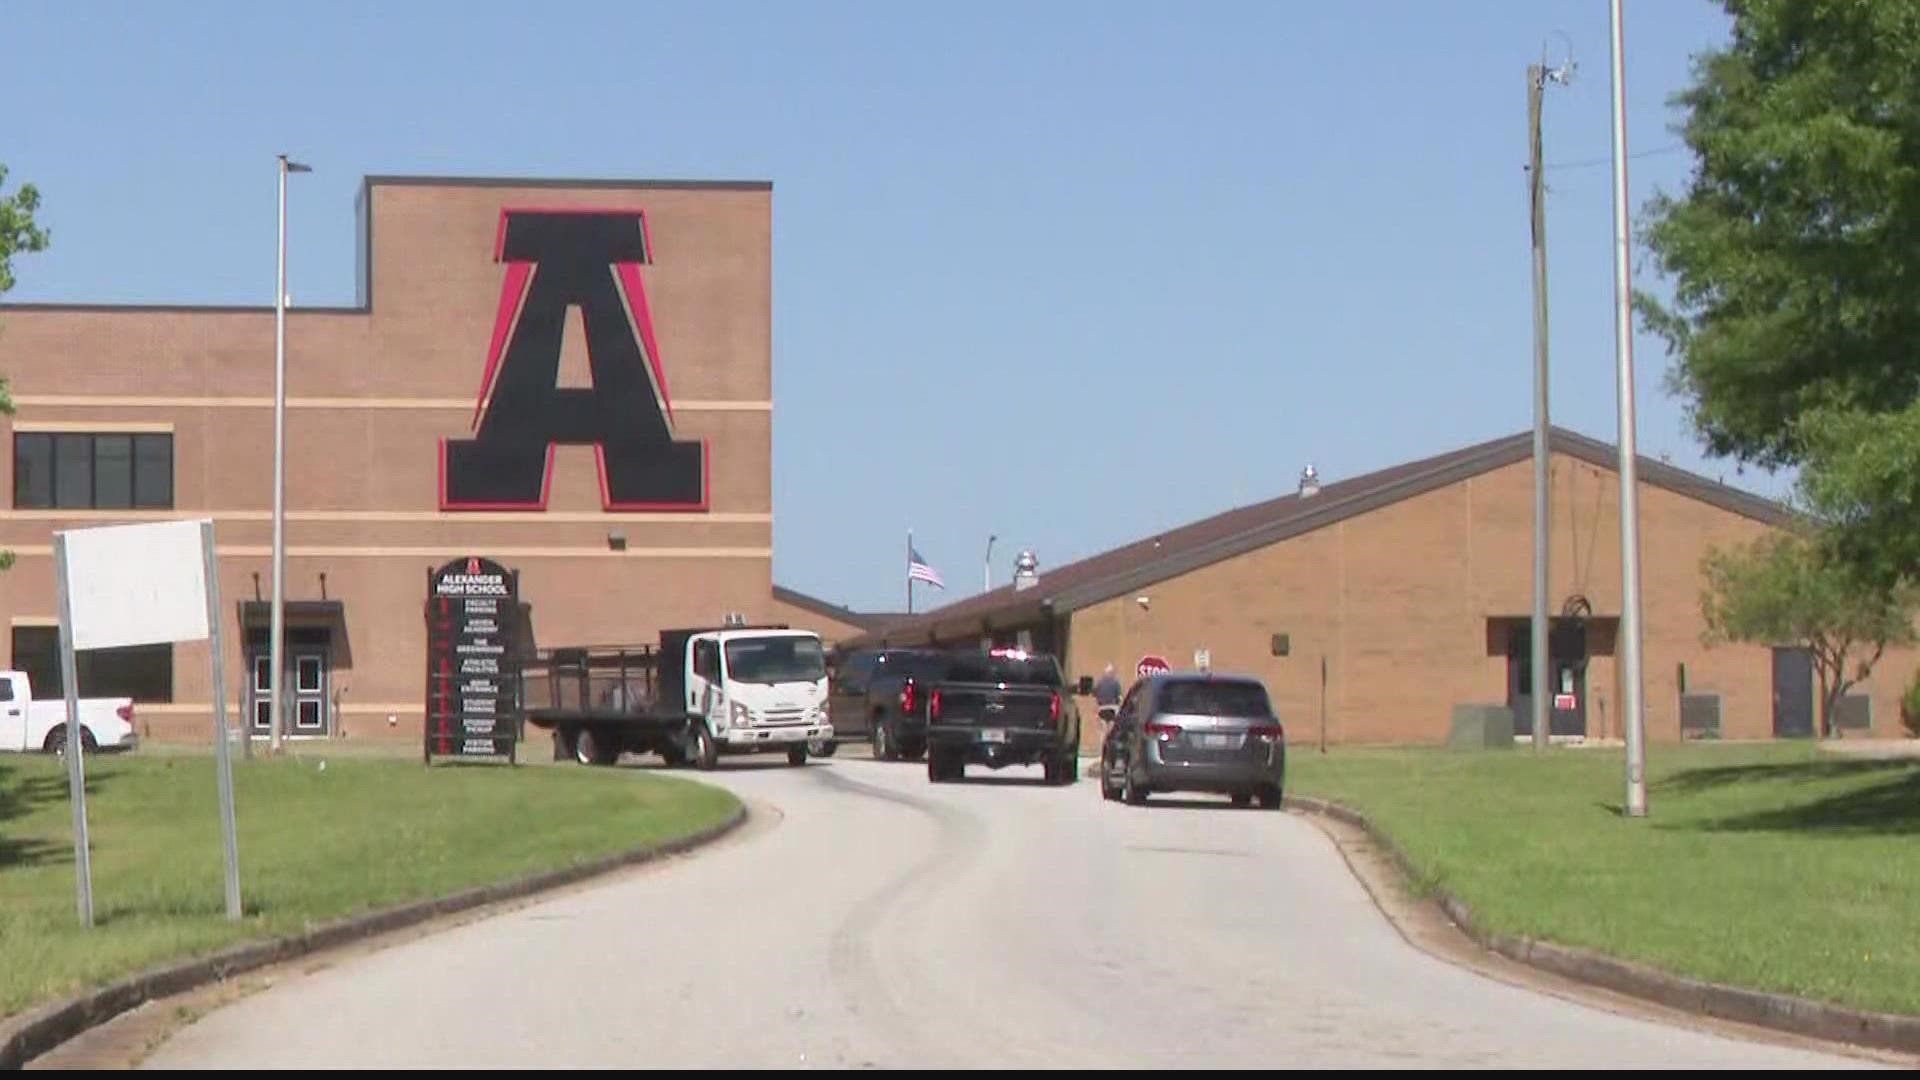 It happened early Tuesday morning at Alexander High School.